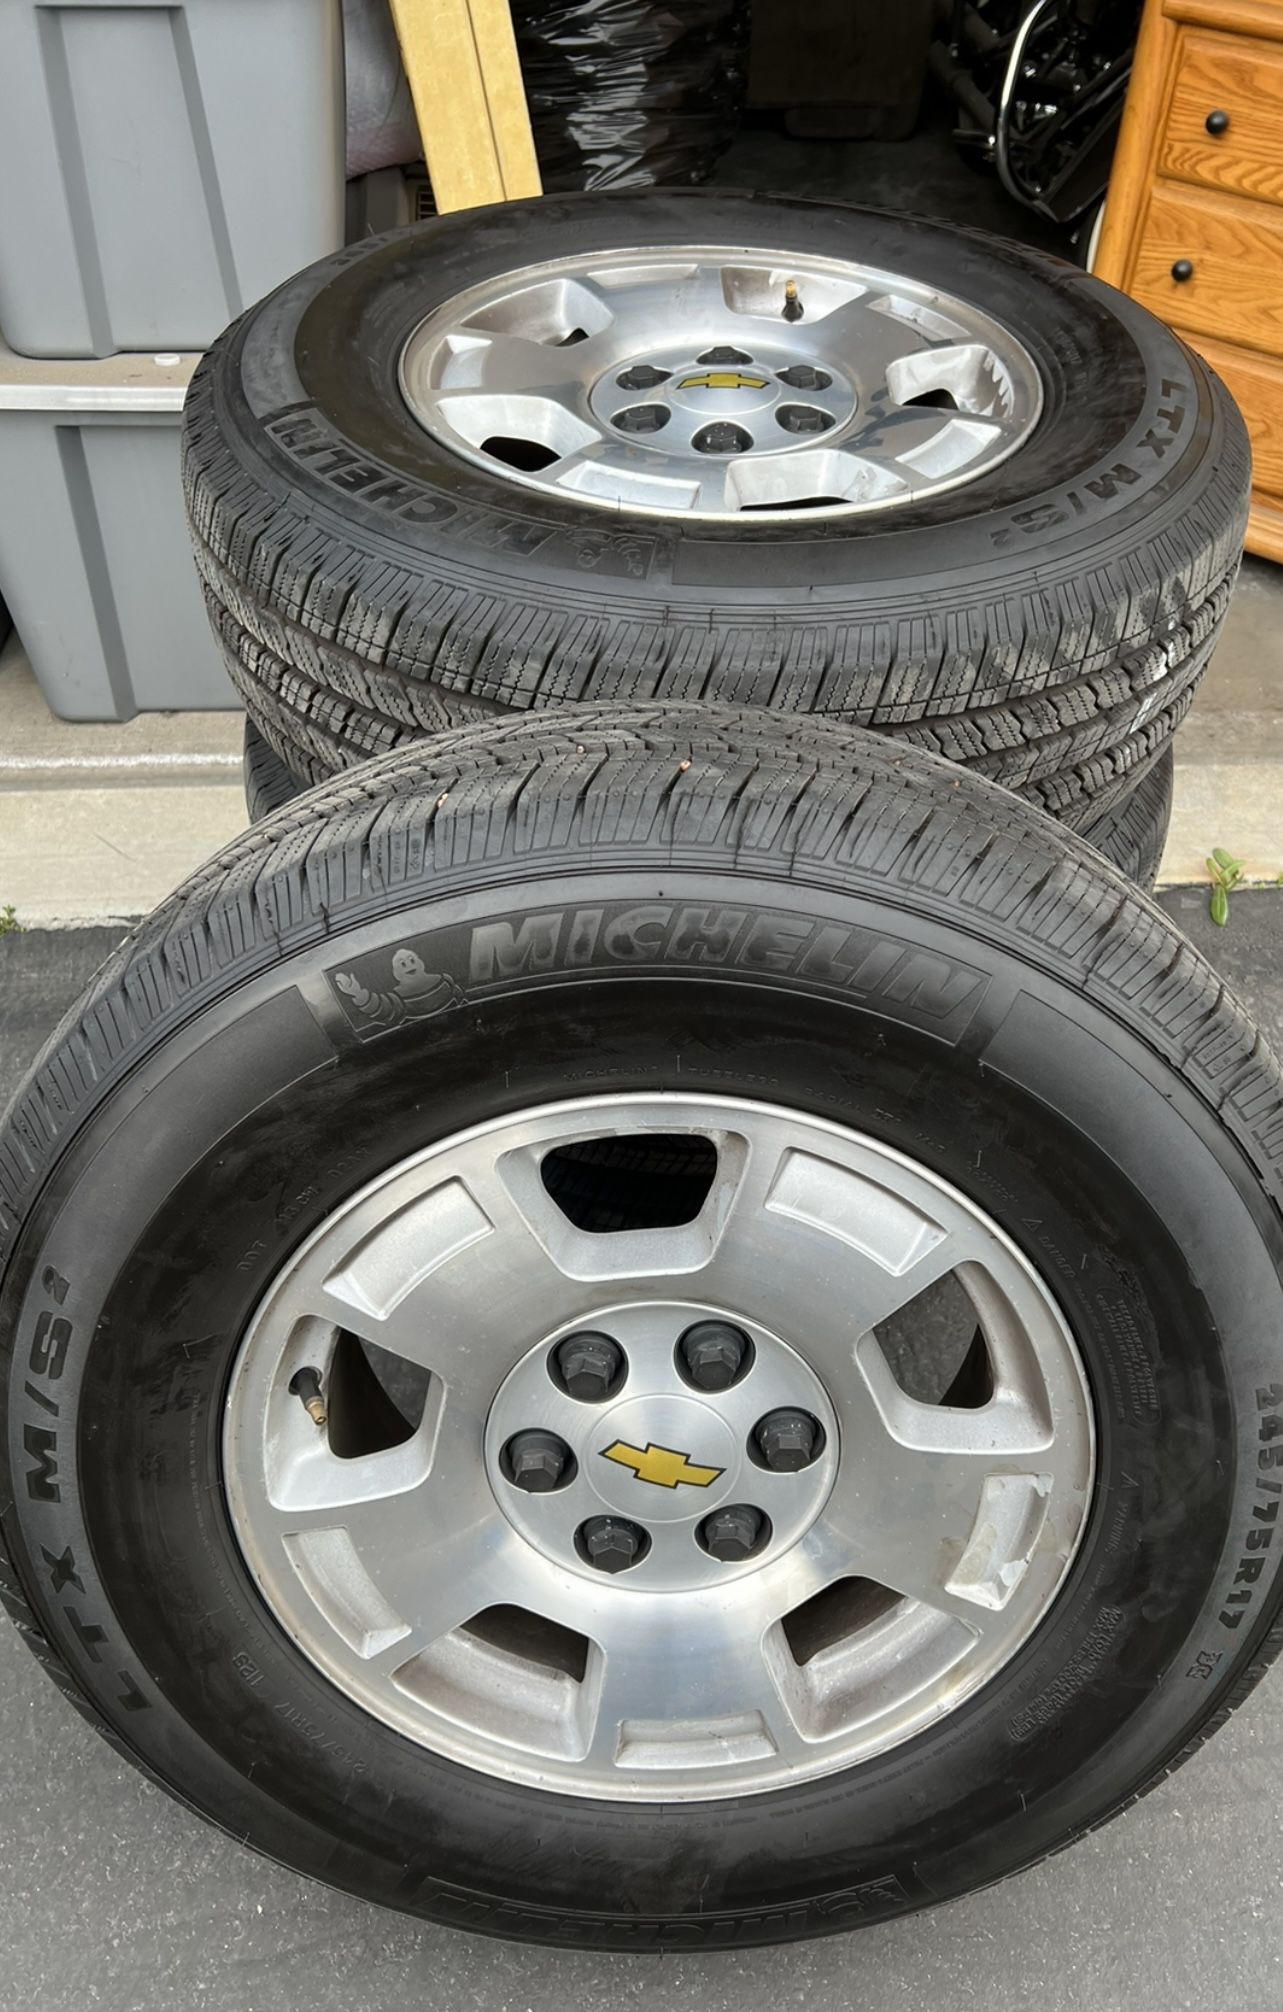 Michelin Tires & Chevy 6 Lugs Rims